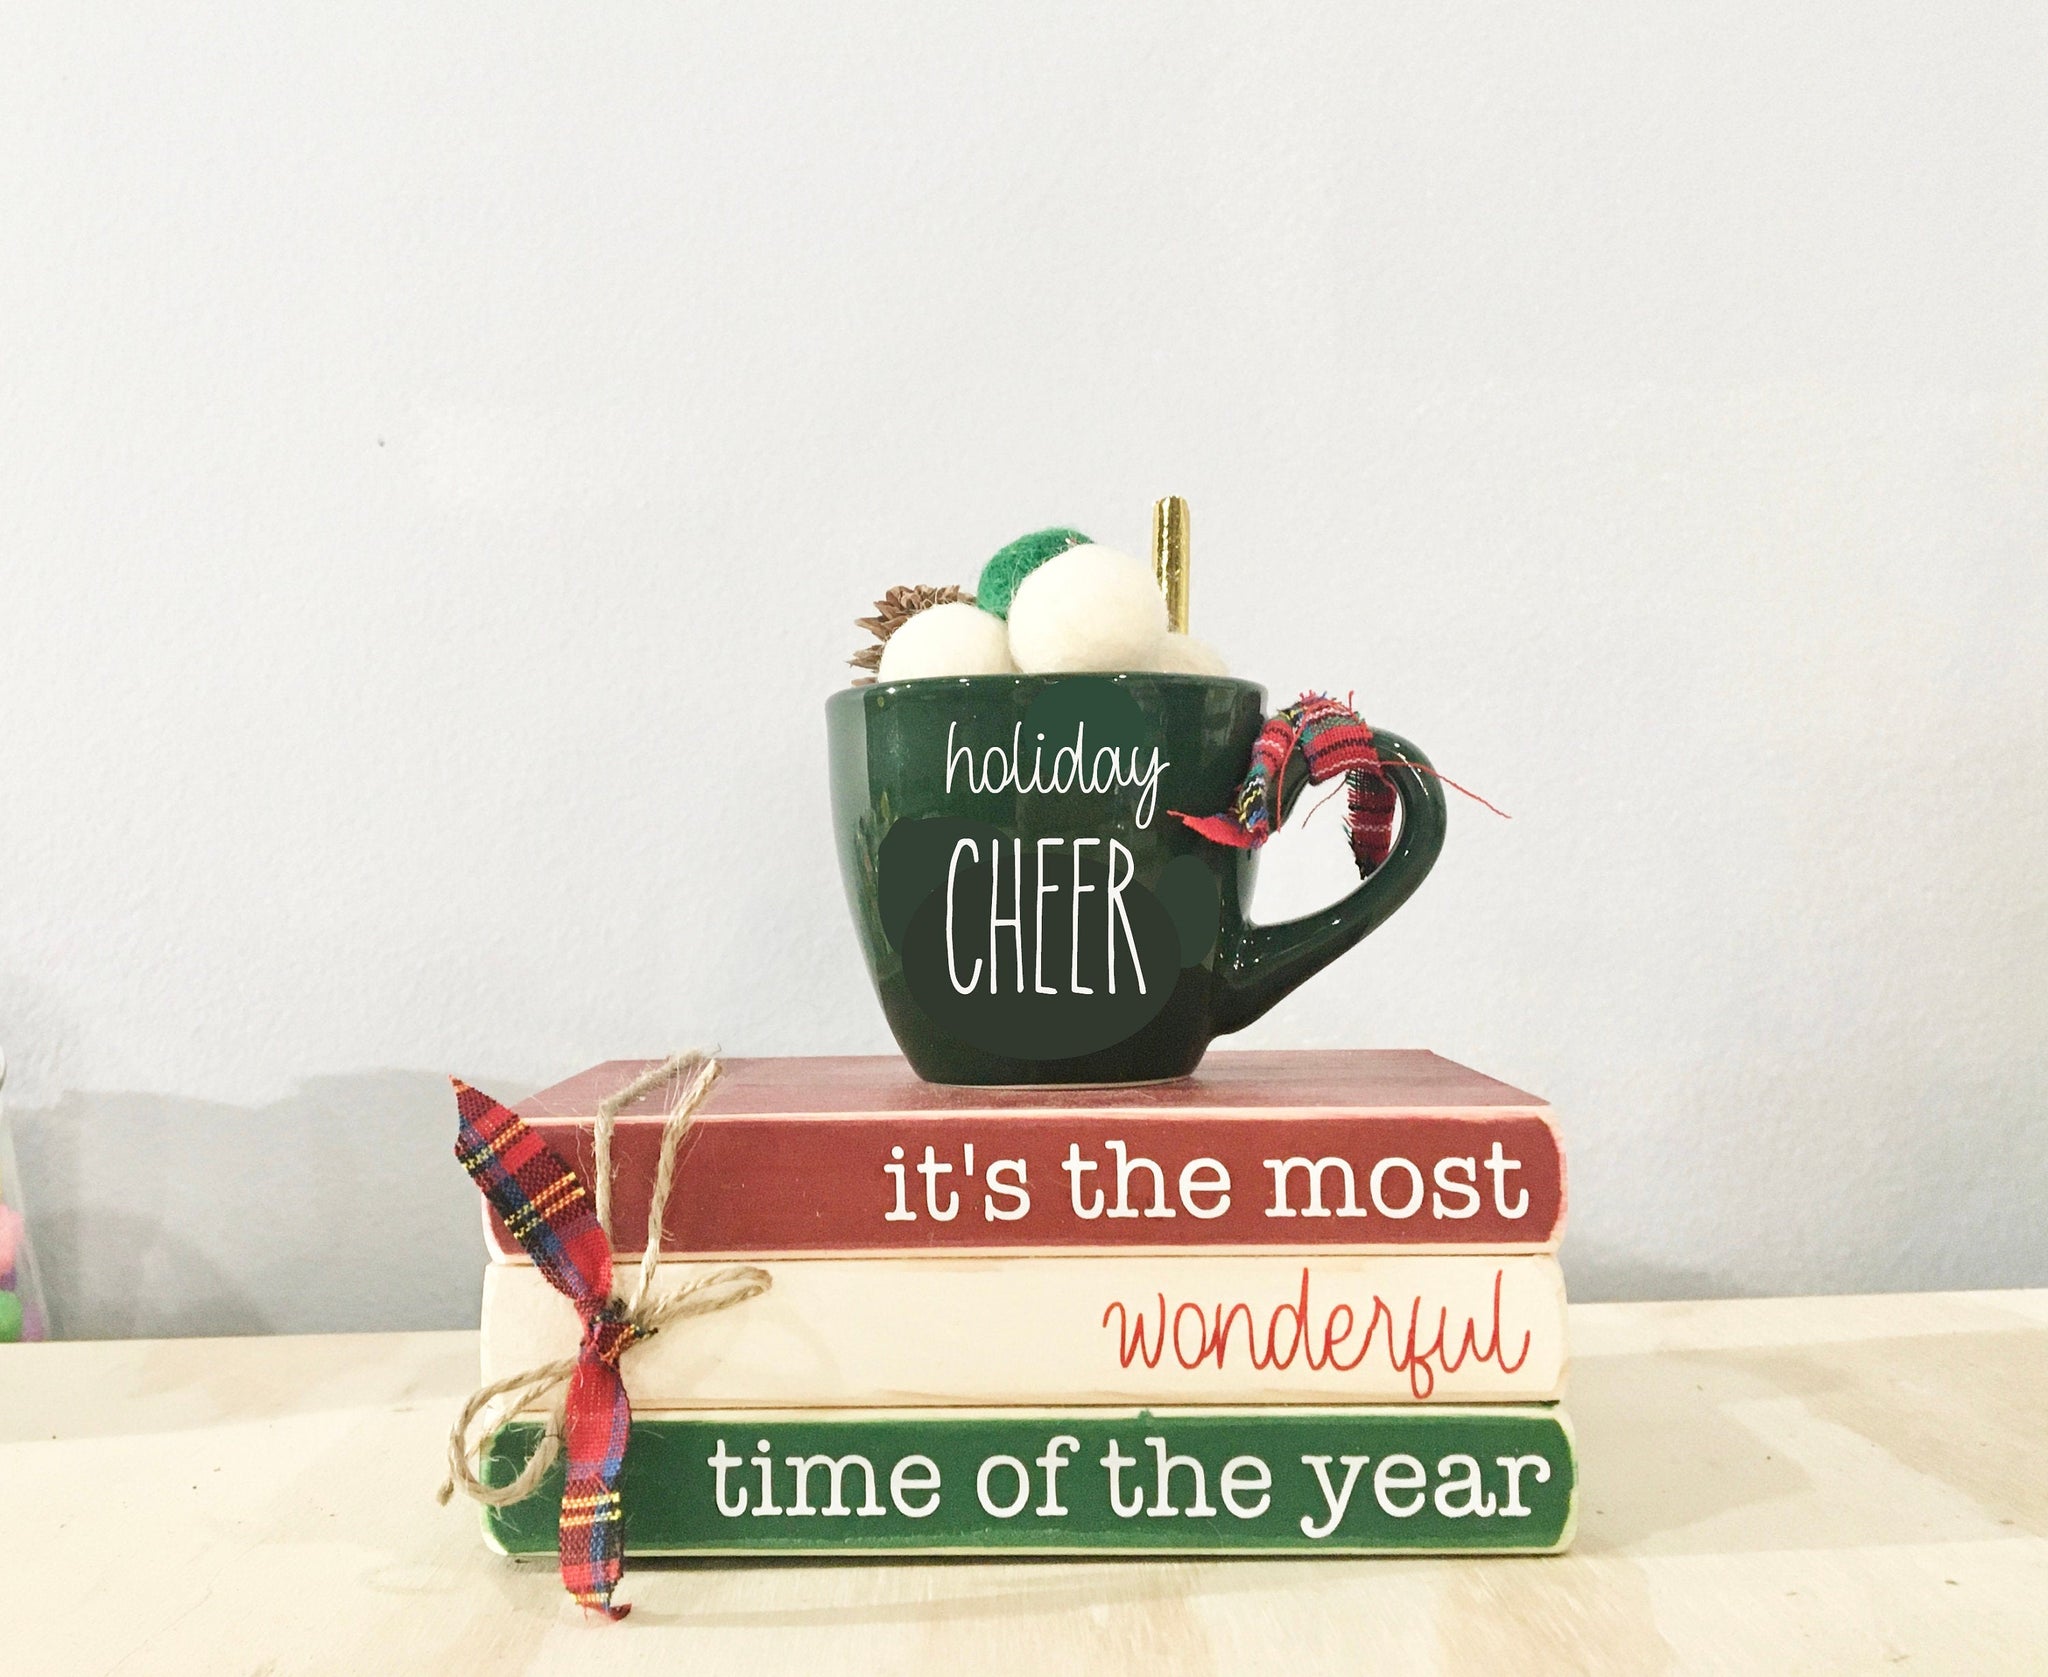 Holiday tiered tray, Christmas books, Tiered tray decor, Holiday cheer, Book stack, Christmas decor, glass mug, It's the most wonderful time